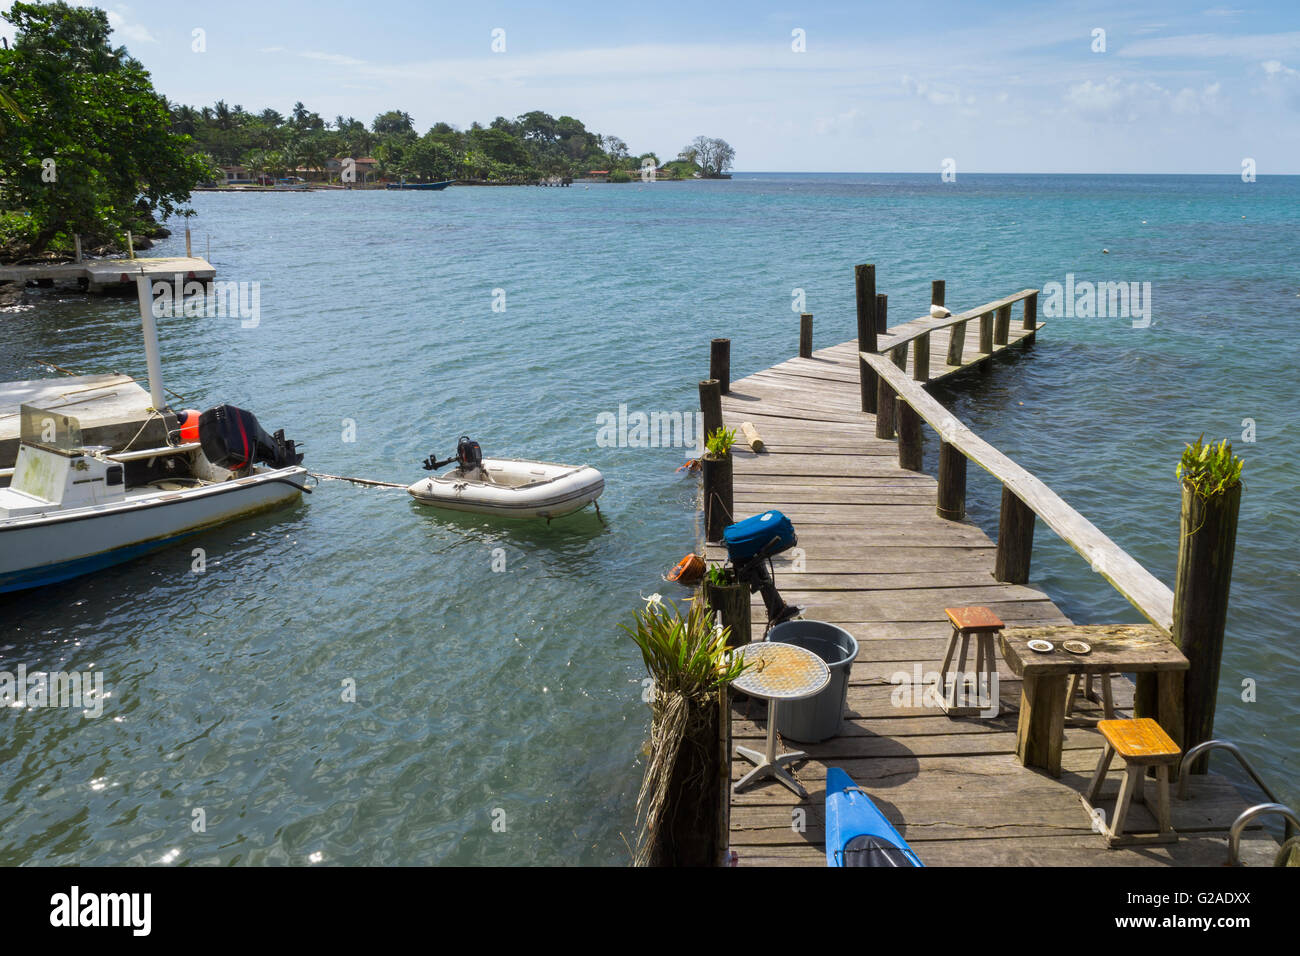 Wooden jetty with motor boat nearby on sea Stock Photo